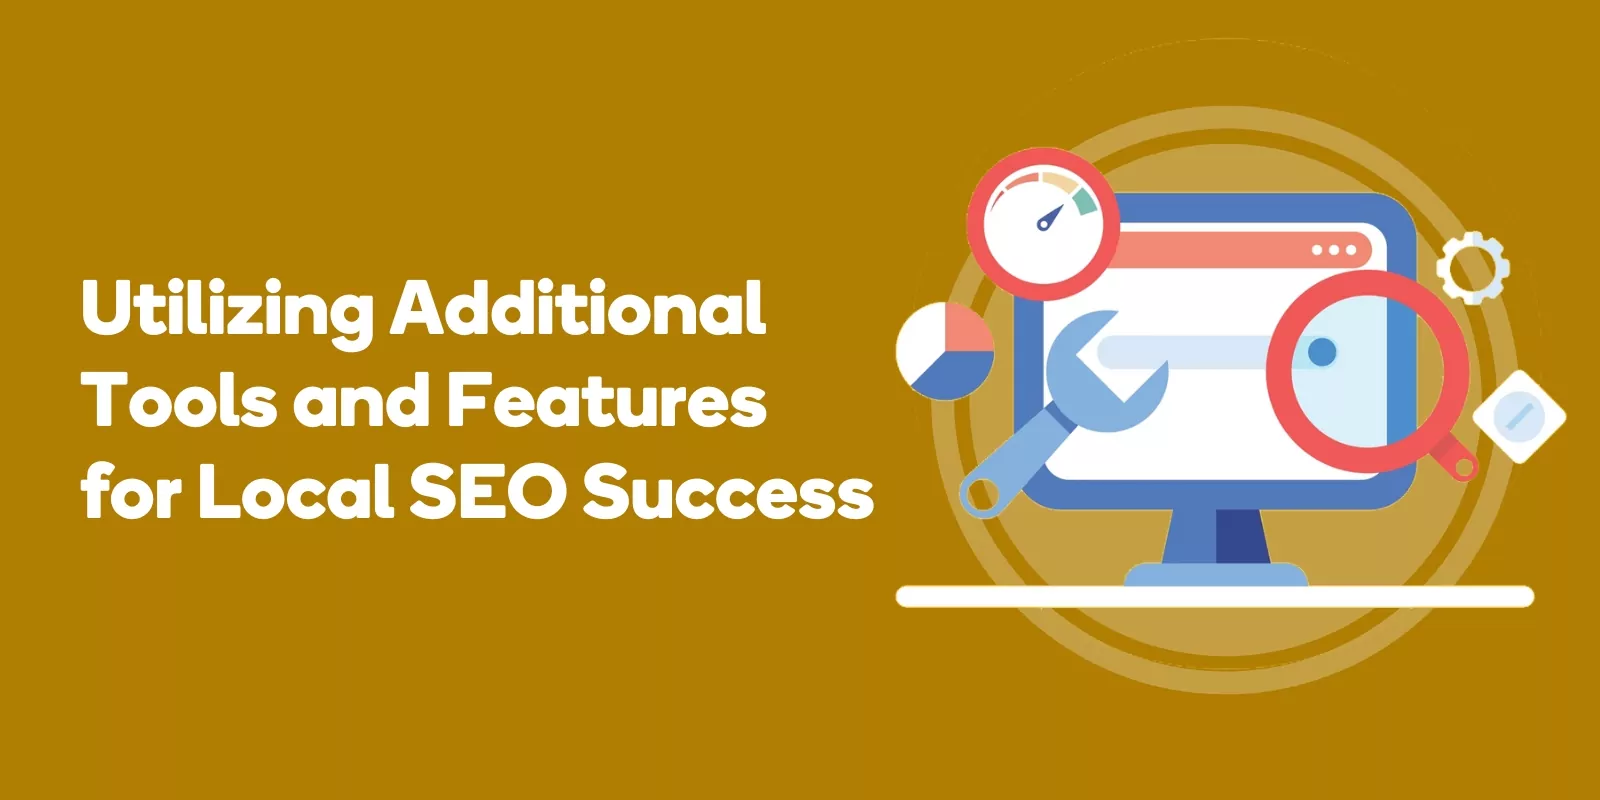 Utilizing Additional Tools and Features for Local SEO Success